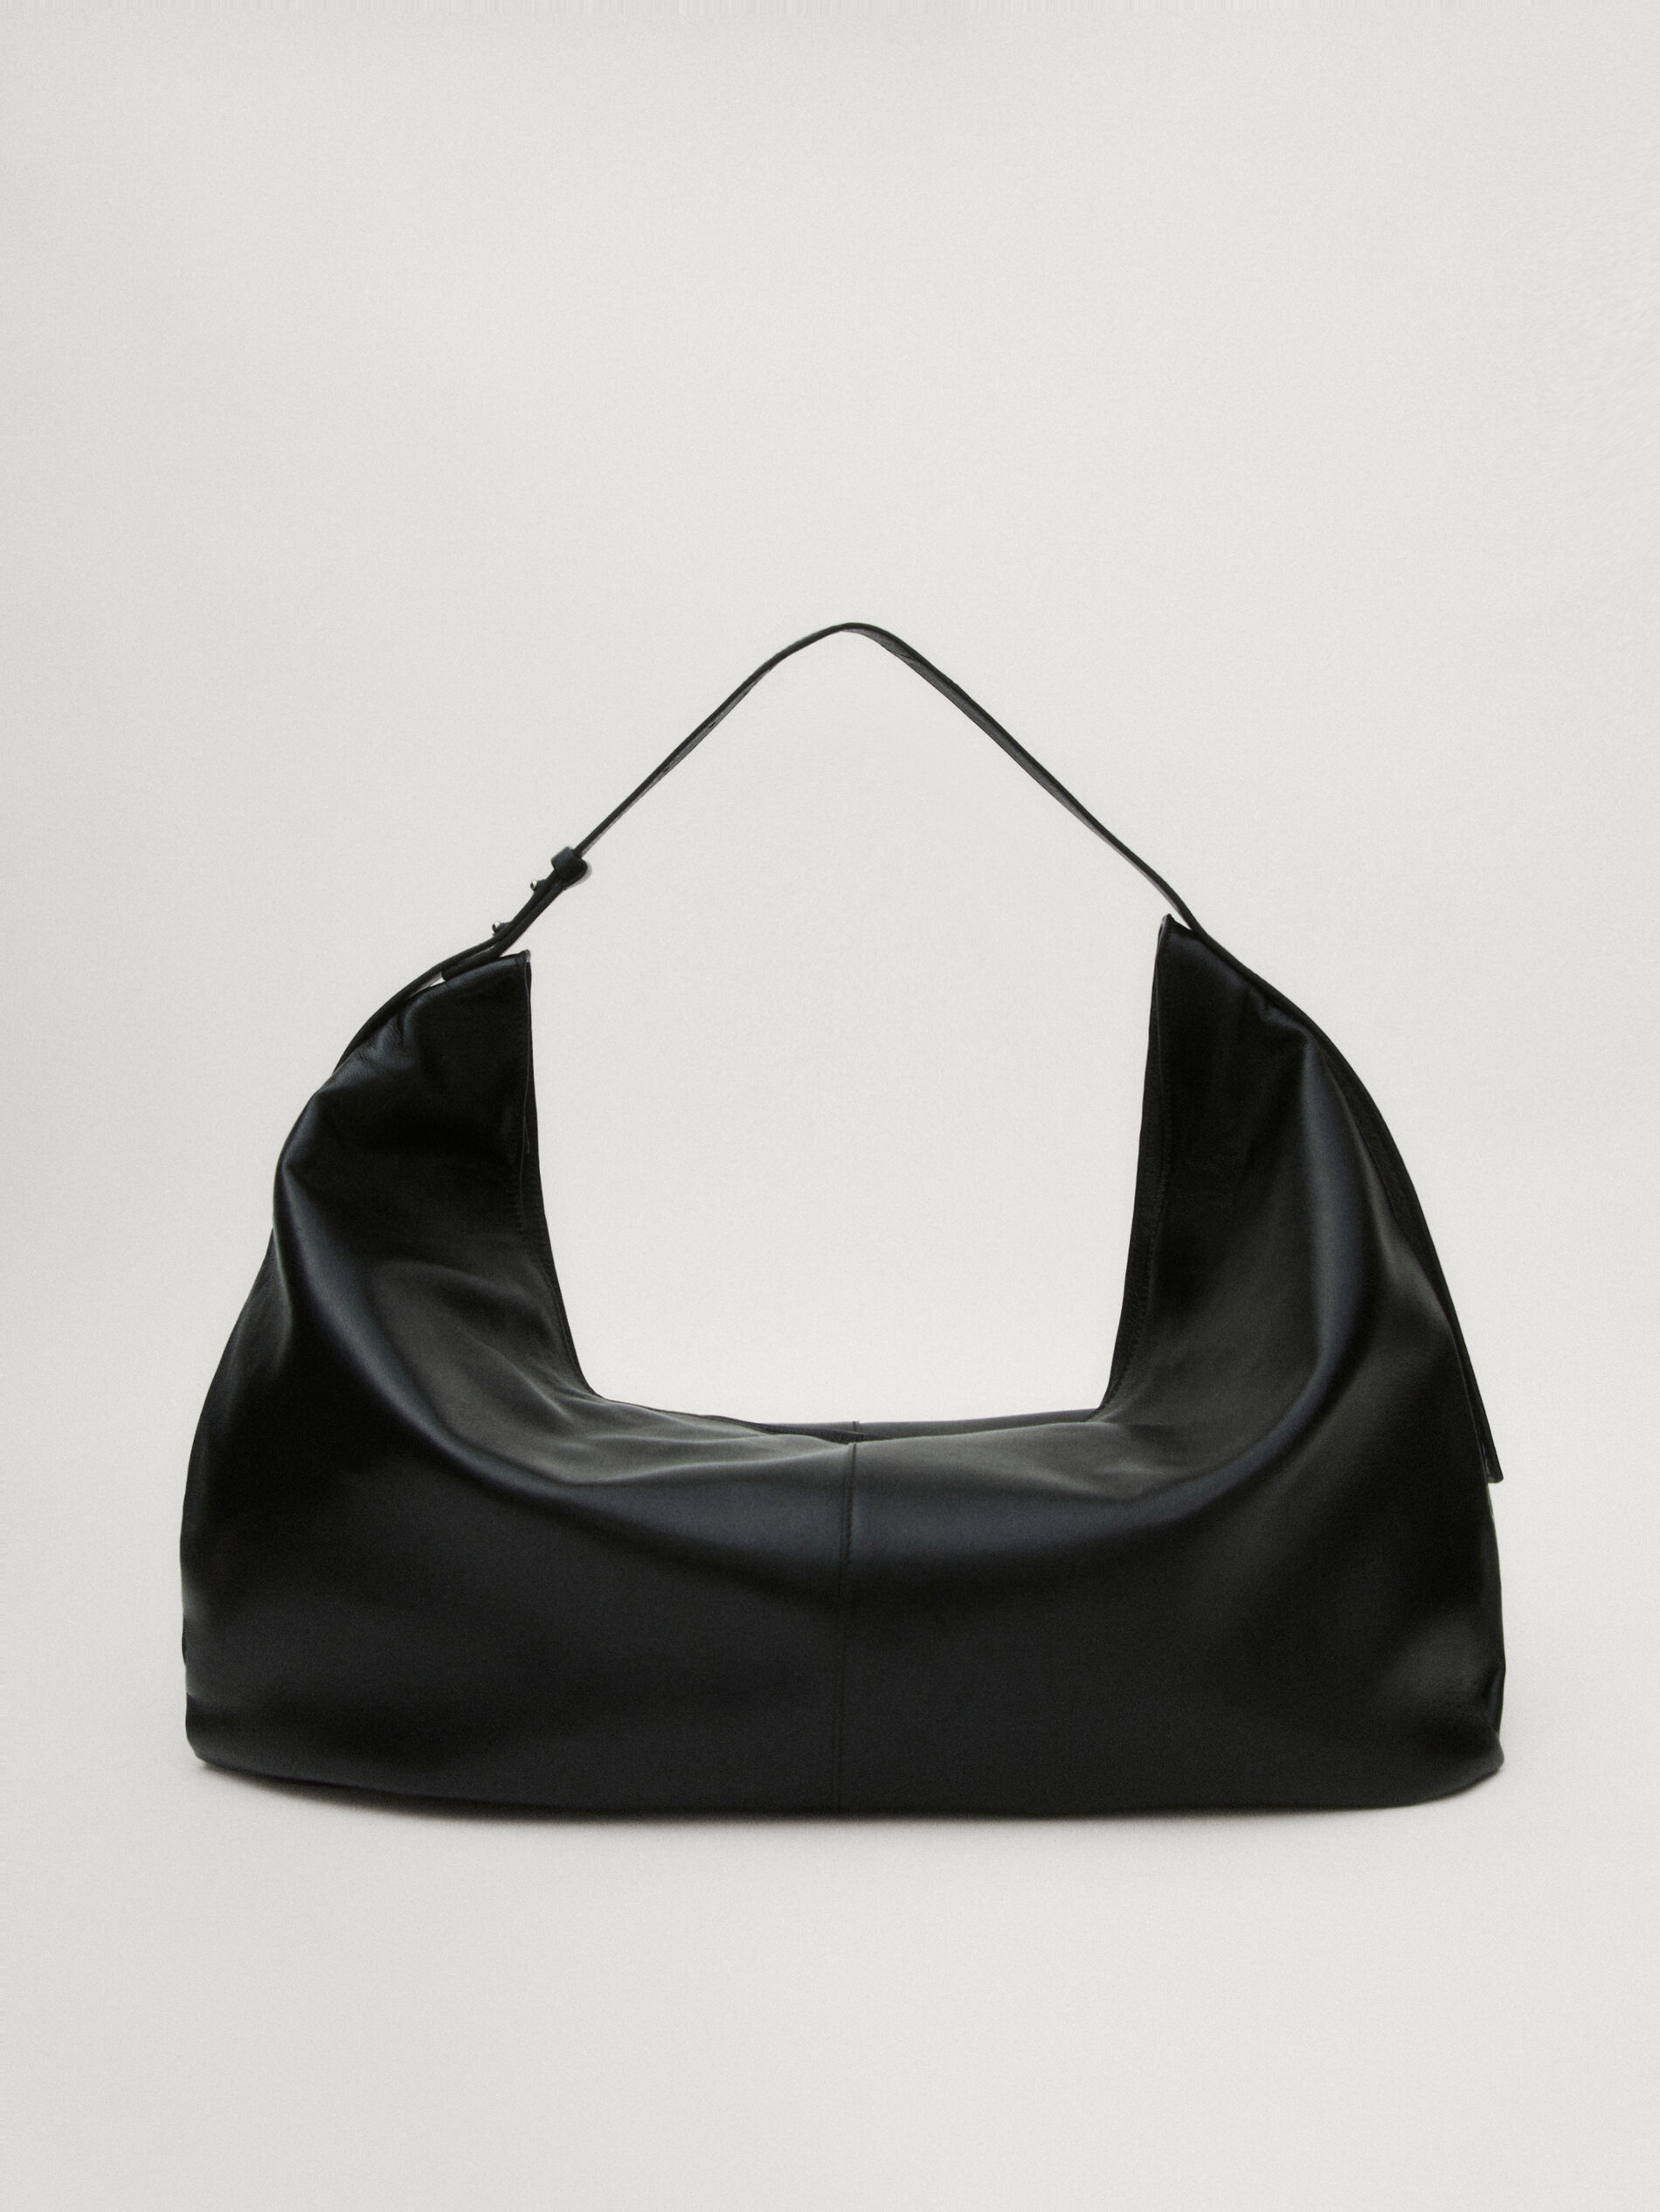 Extra Small Nappa leather Pasticcino Bag, black | Weekend Max Mara